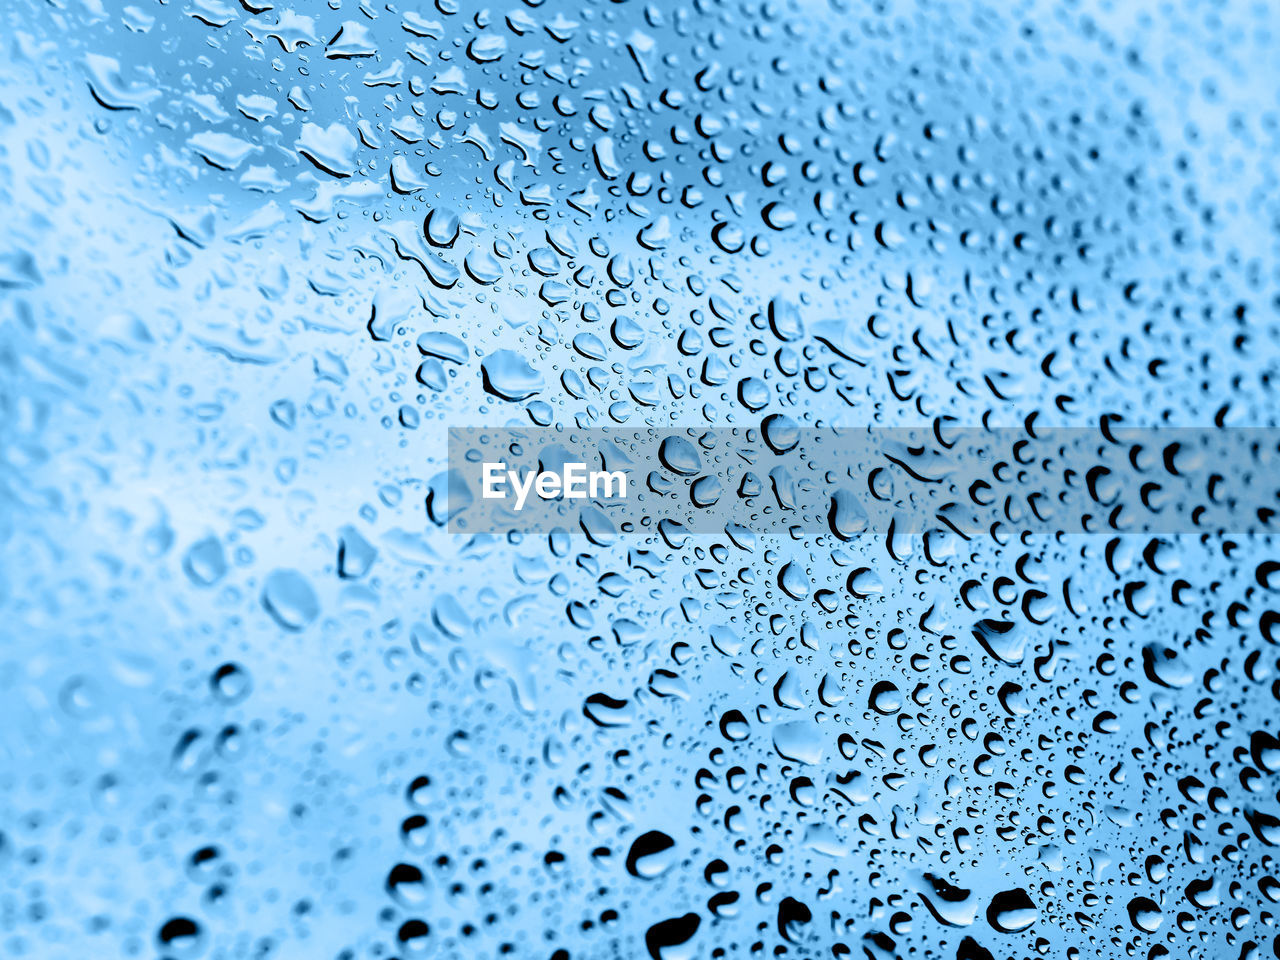 Rain drops on glass. silhouettes of classic blue water drops on a transparent surface.